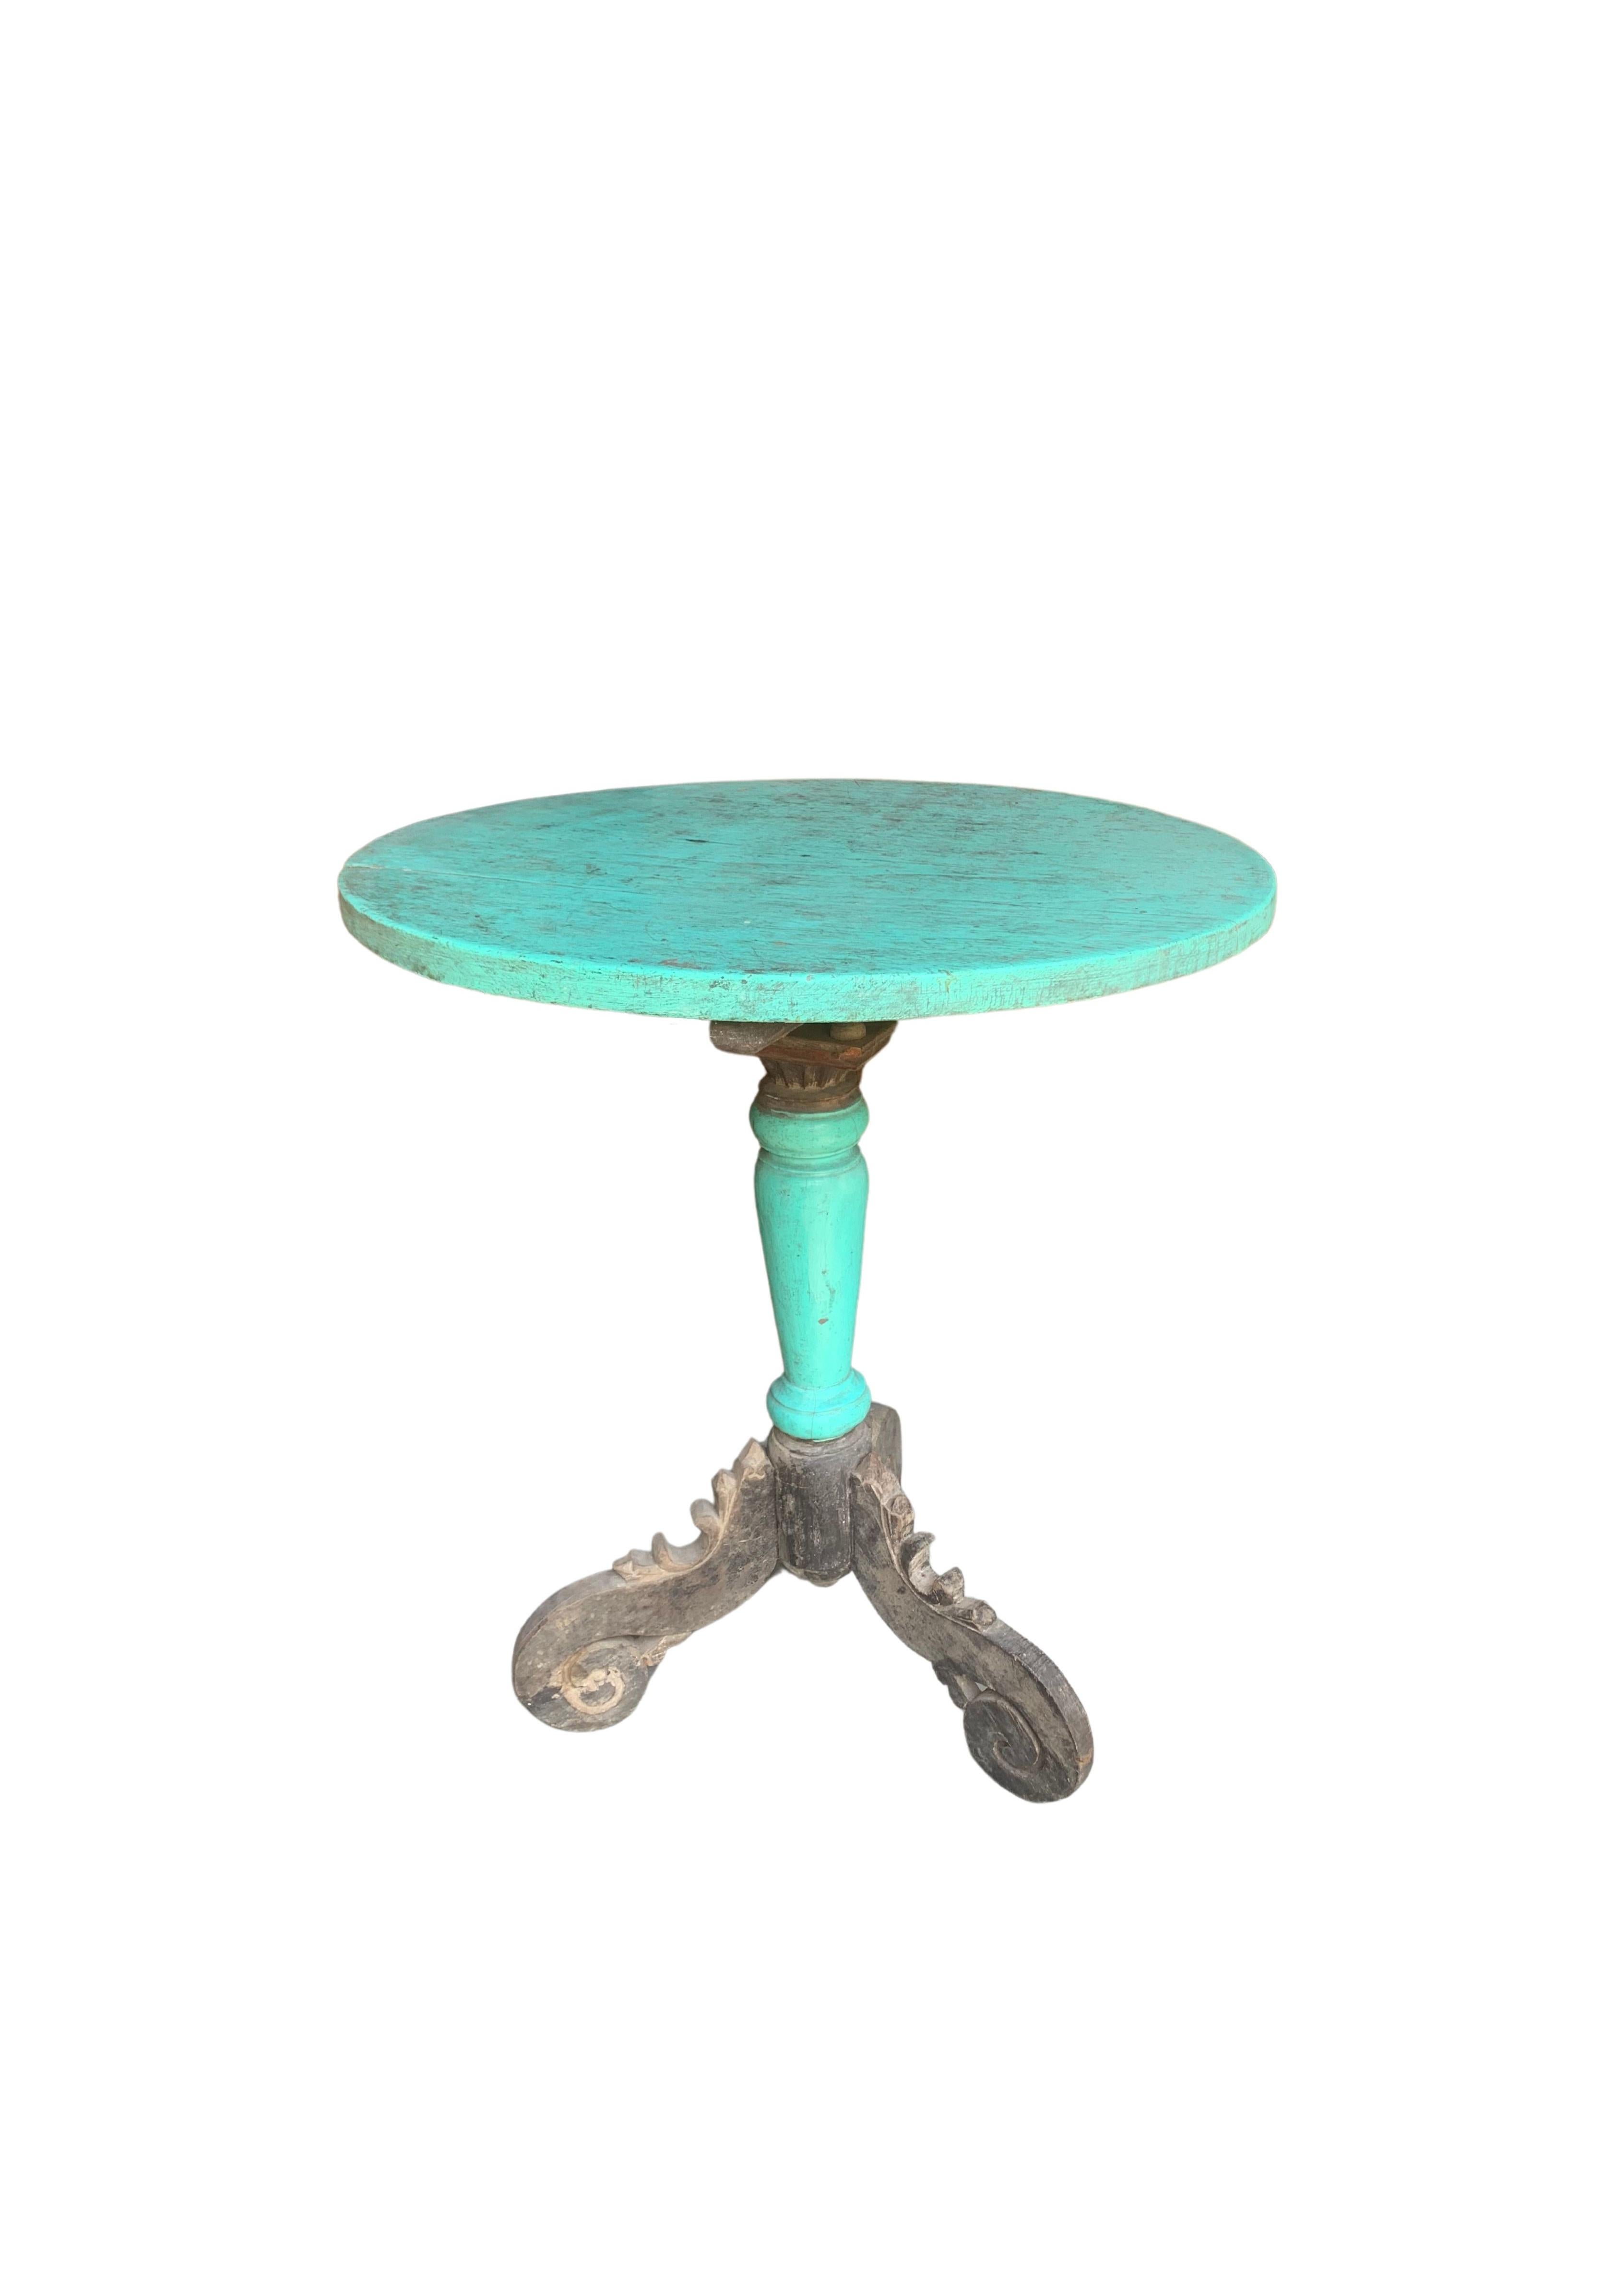 Other Teak Table with Polychrome, Carved Legs, Madura Island, Java, Indonesia, c. 1950 For Sale